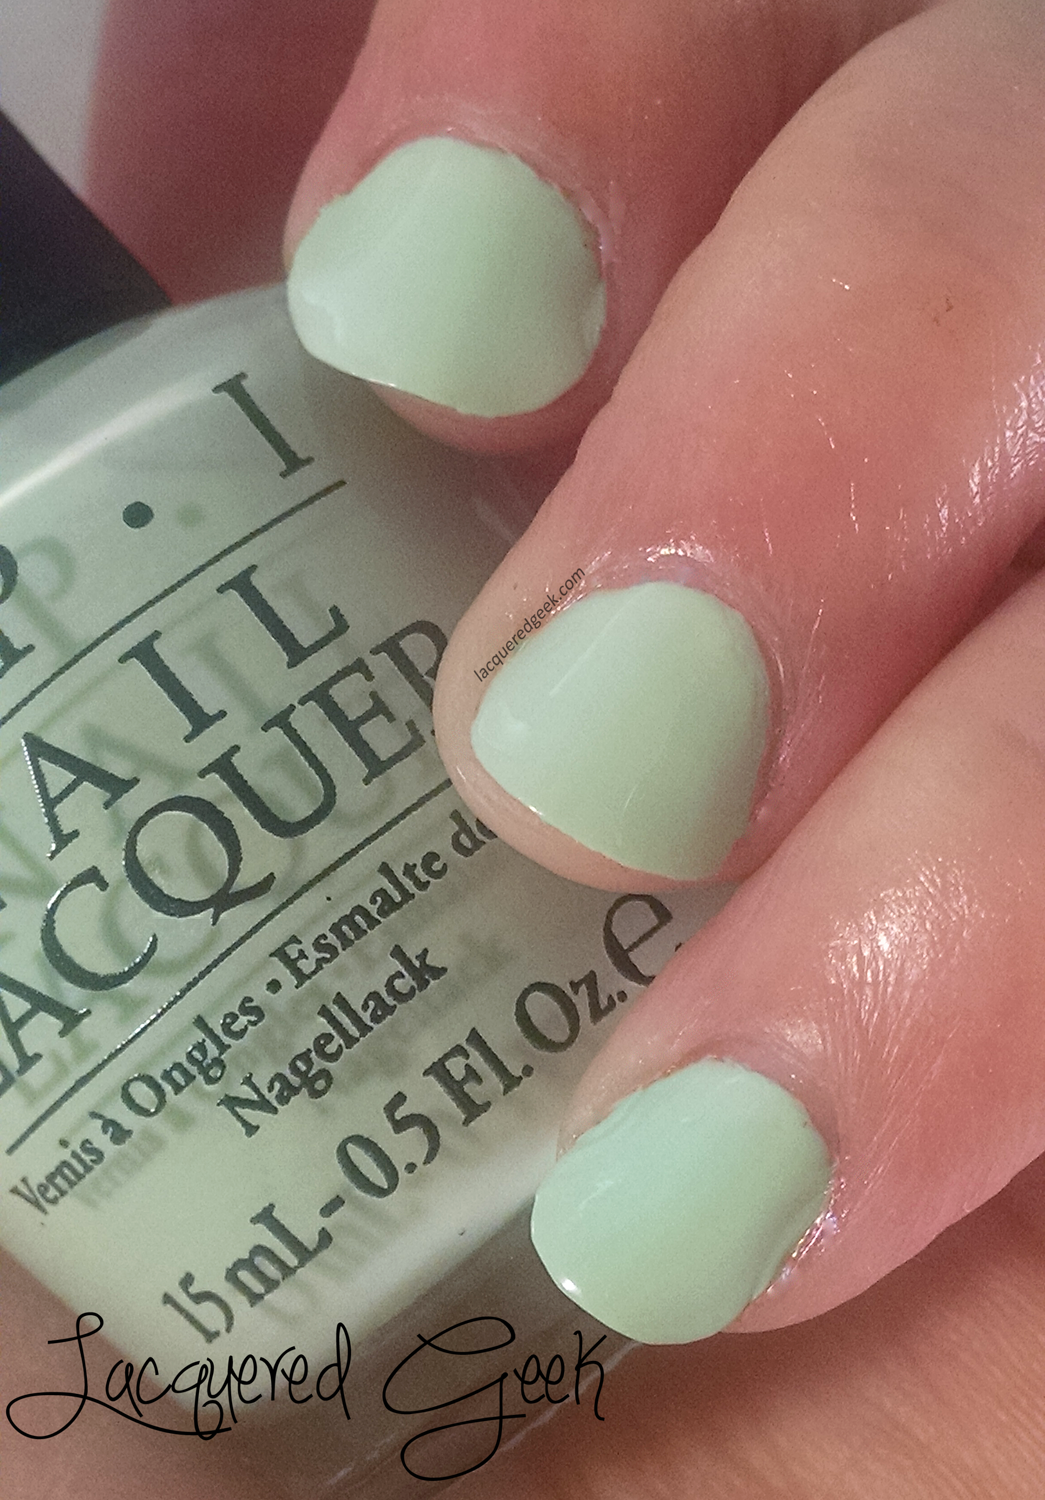 OPI That's Hula-rious! swatch from the OPI Hawaii collection